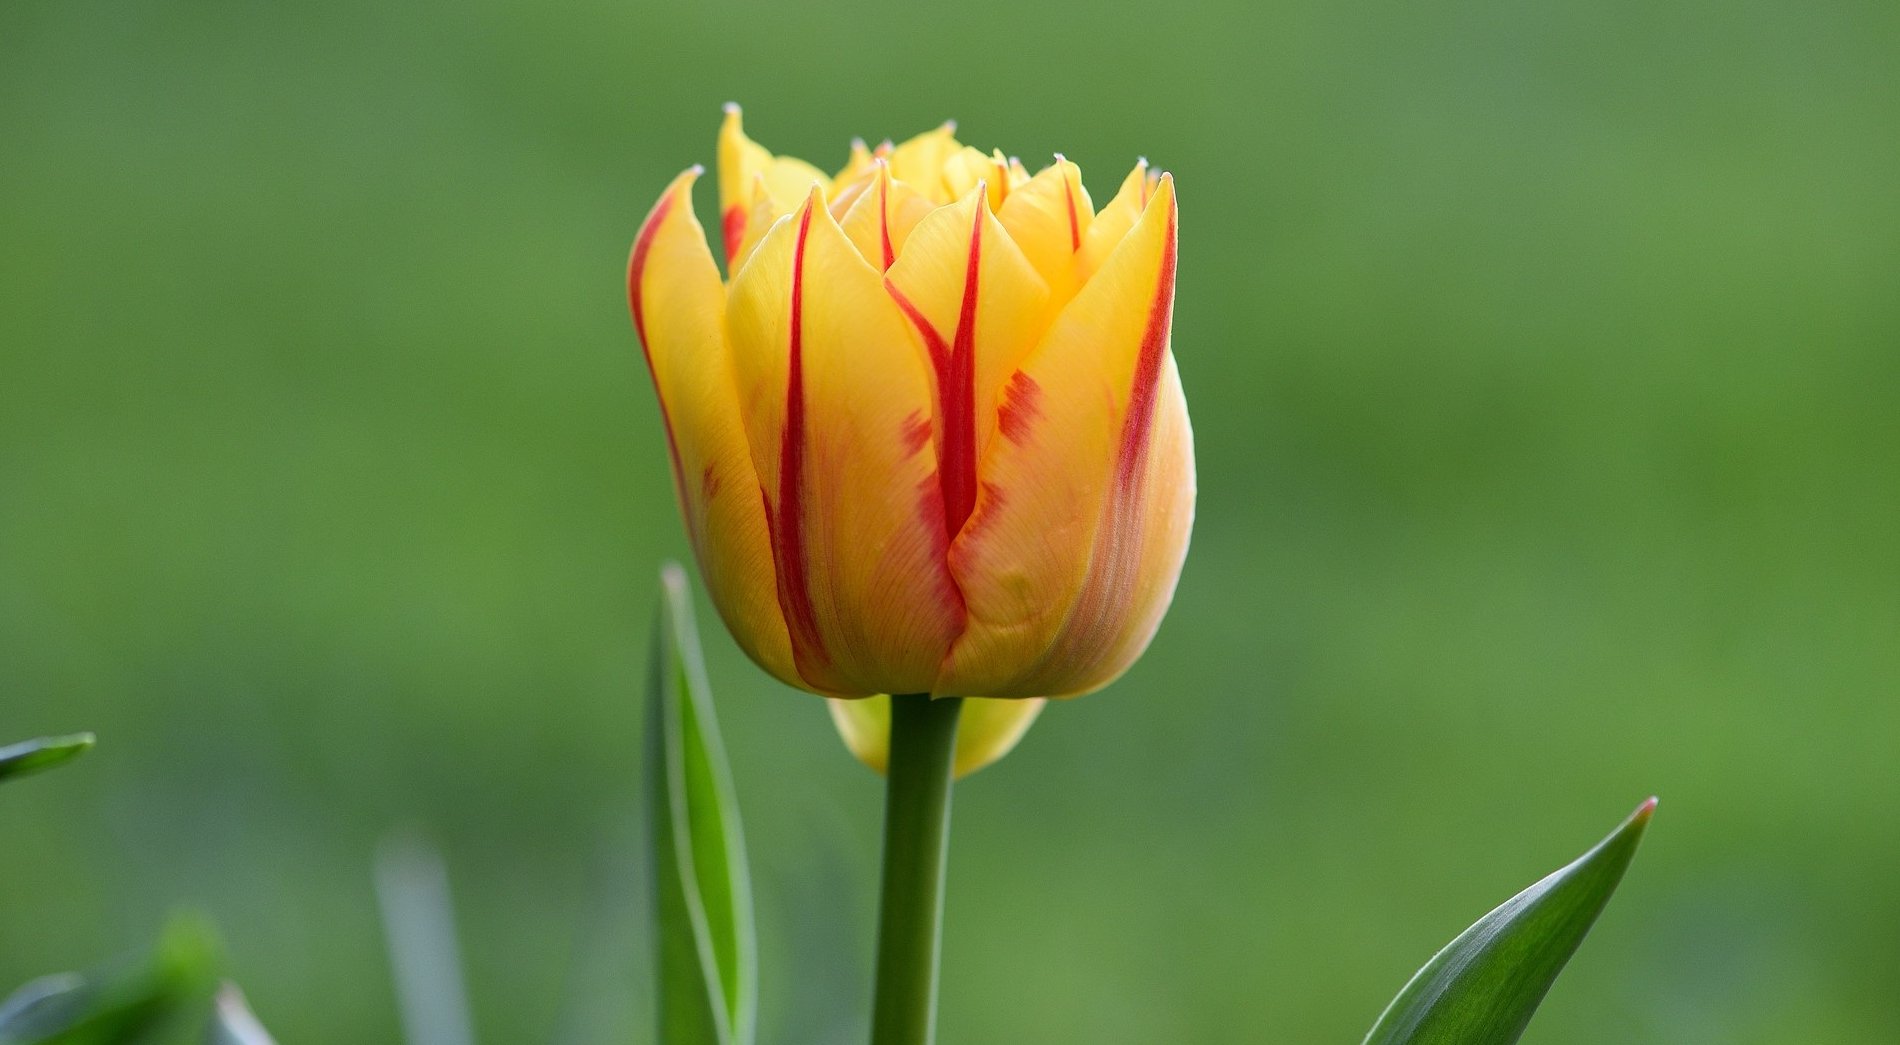 Free picture: summer, nature, green leaf, flower, yellow tulip, plant ...